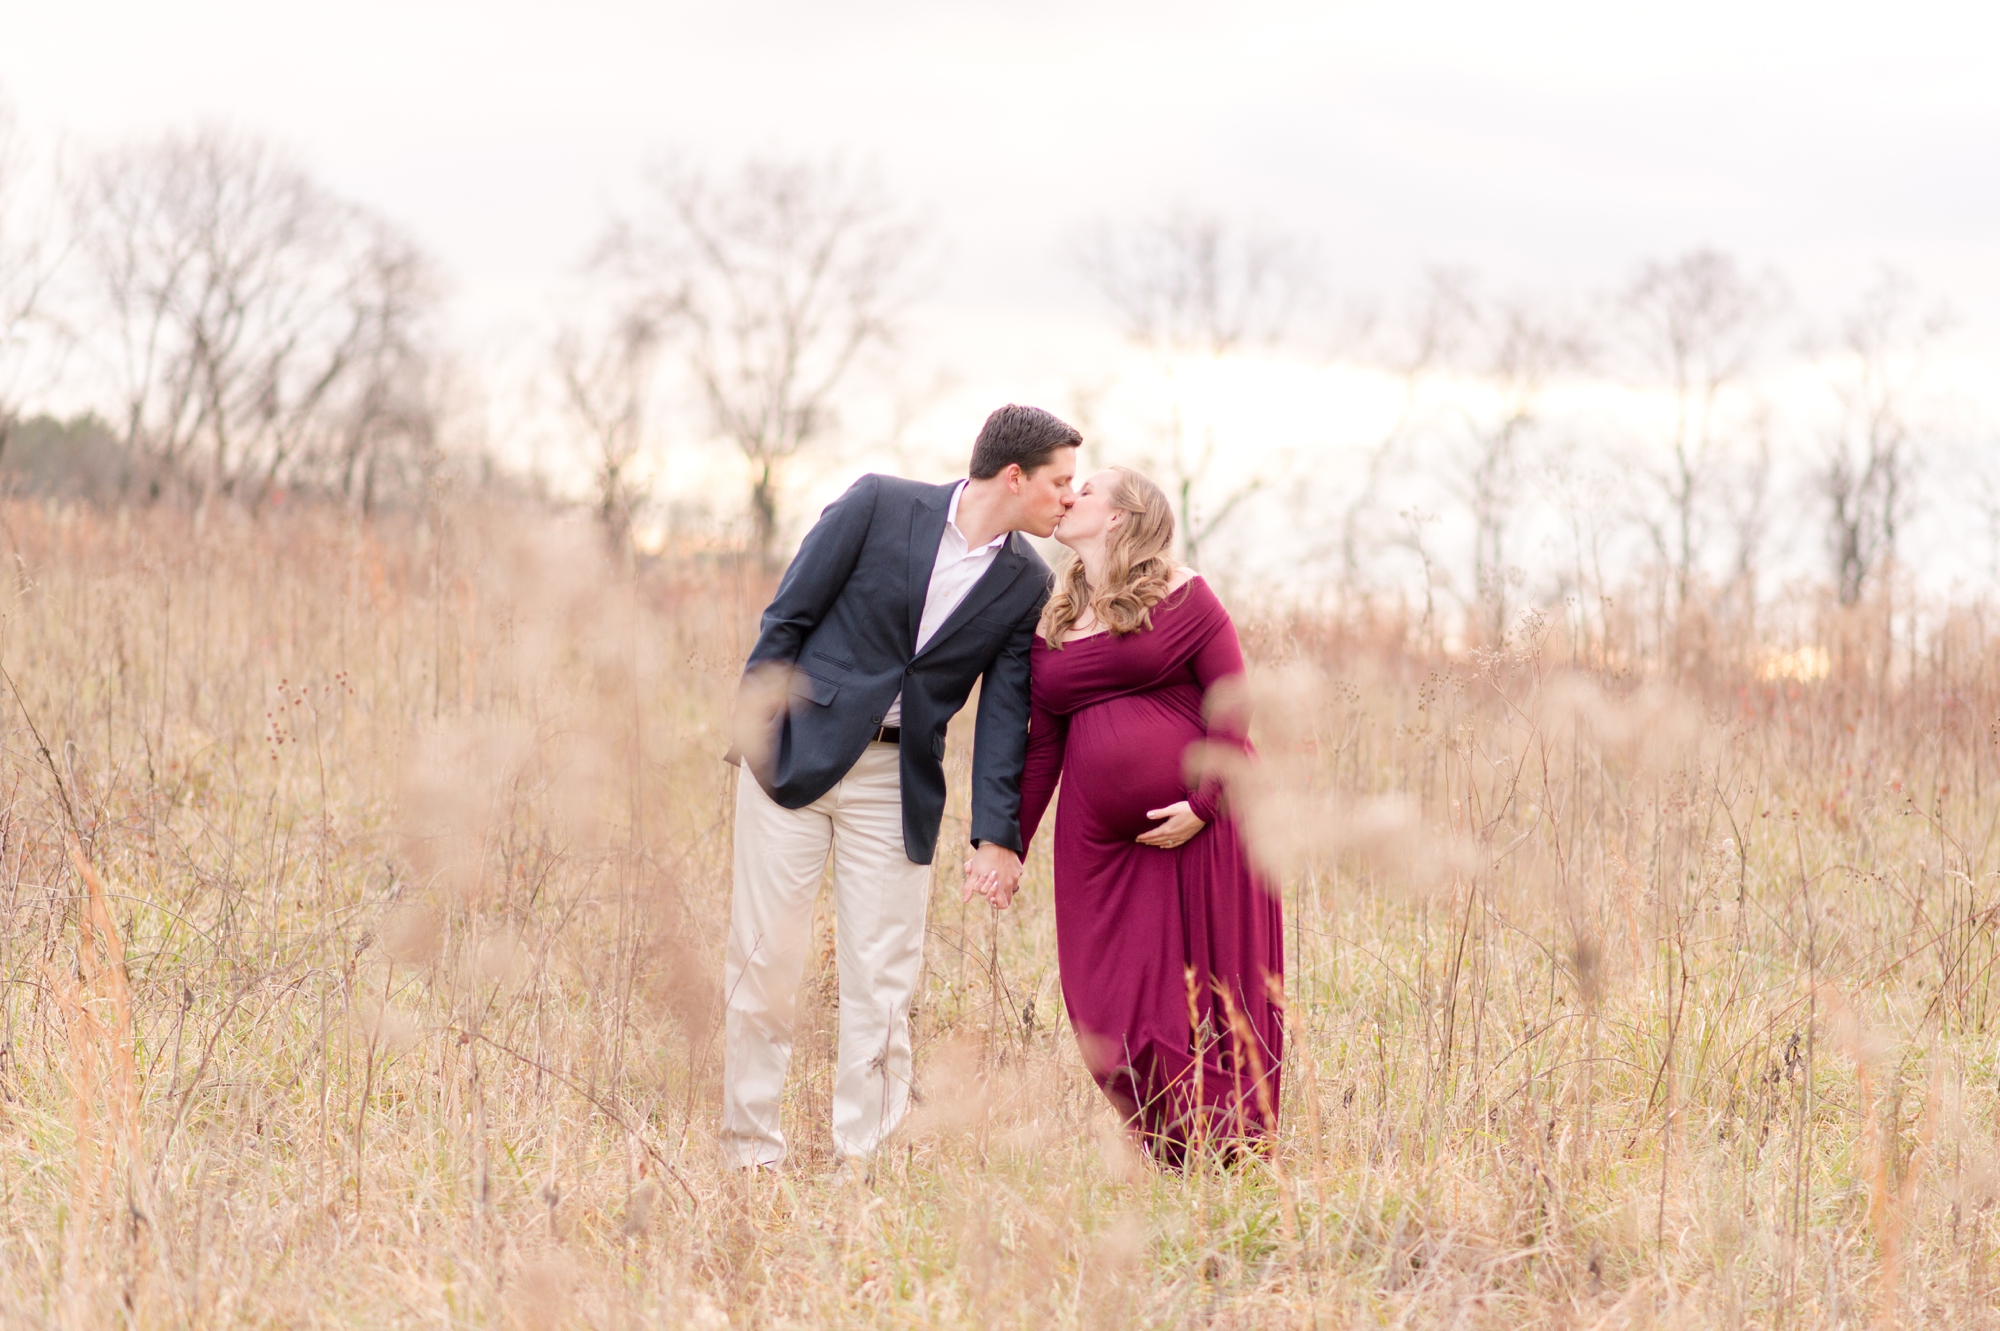 AG and Kevin Maternity-284_anna grace photography baltimore maryland maternity photographer cromwell valley park photo.jpg